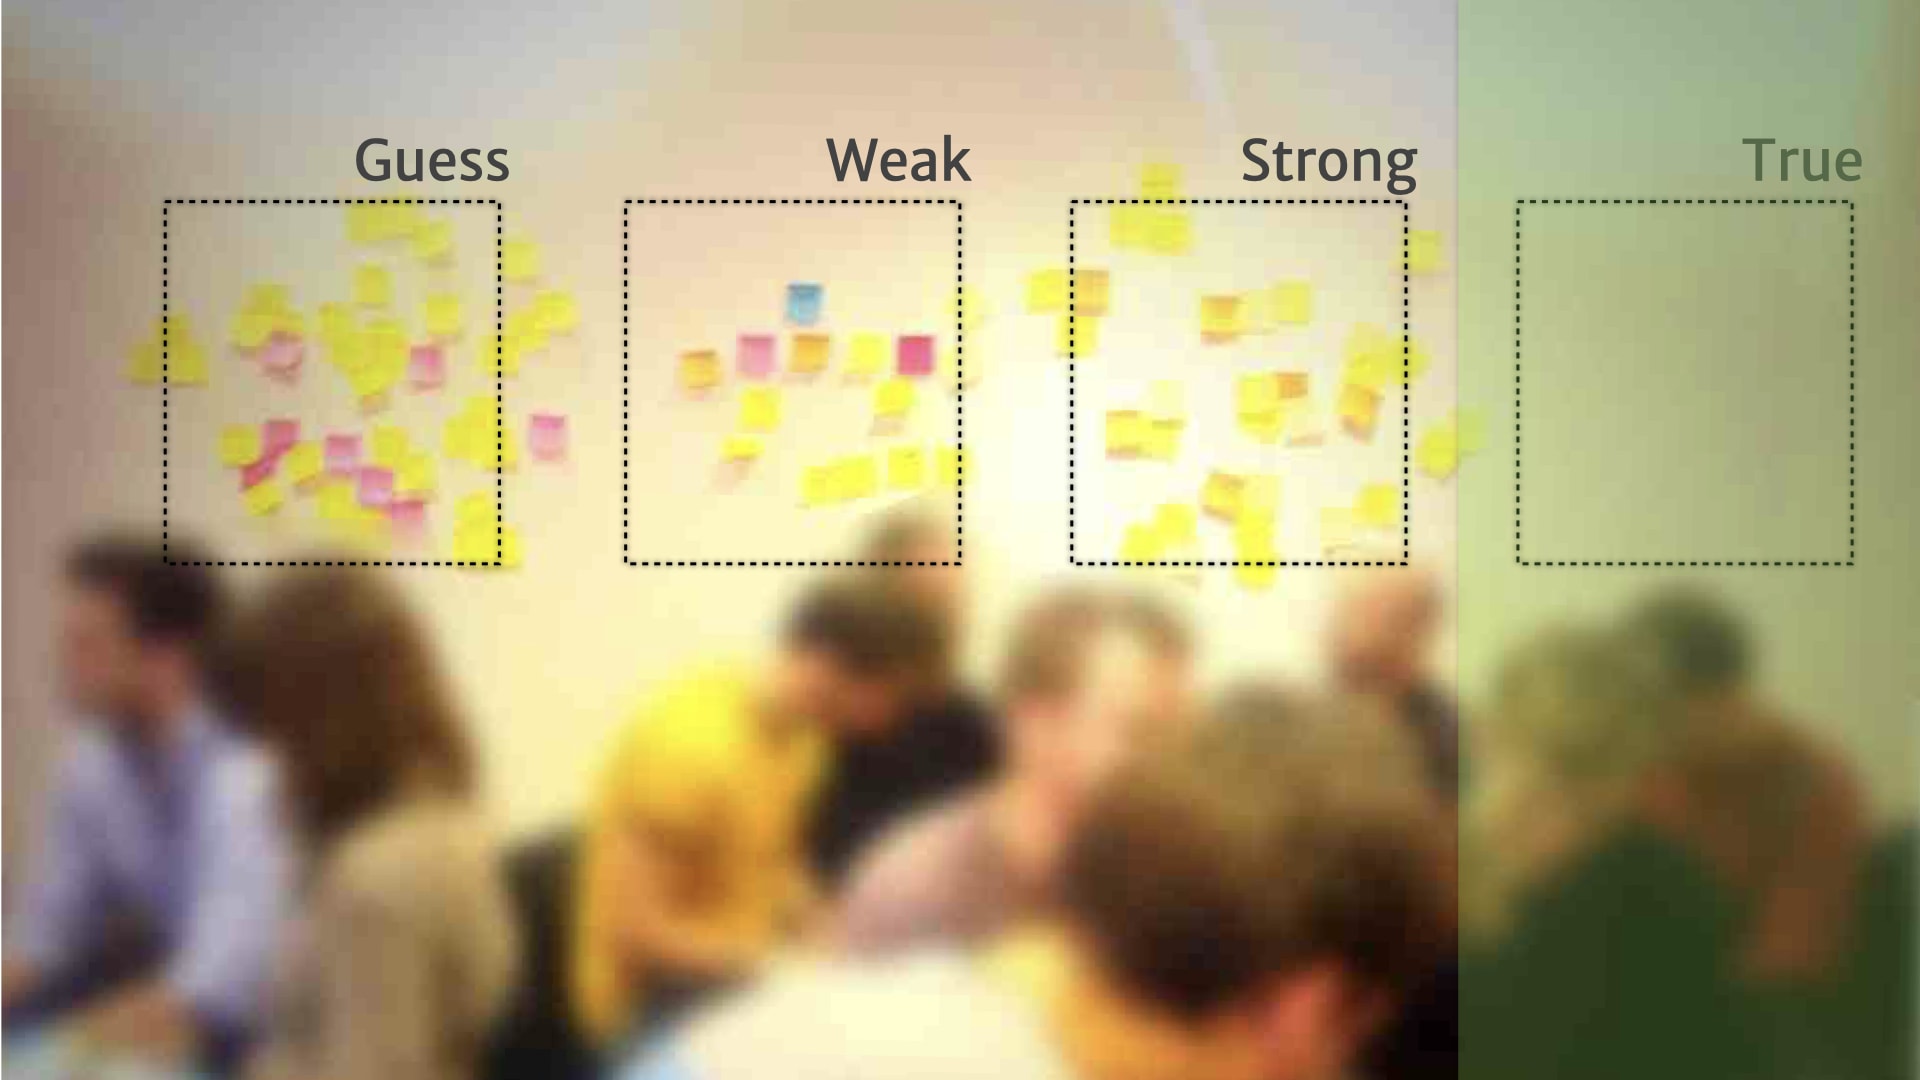 A picture of a wall of post-it notes divided into four categories running left to right (Guess, Weak, Strong, and True). The true category is highlighted in green.